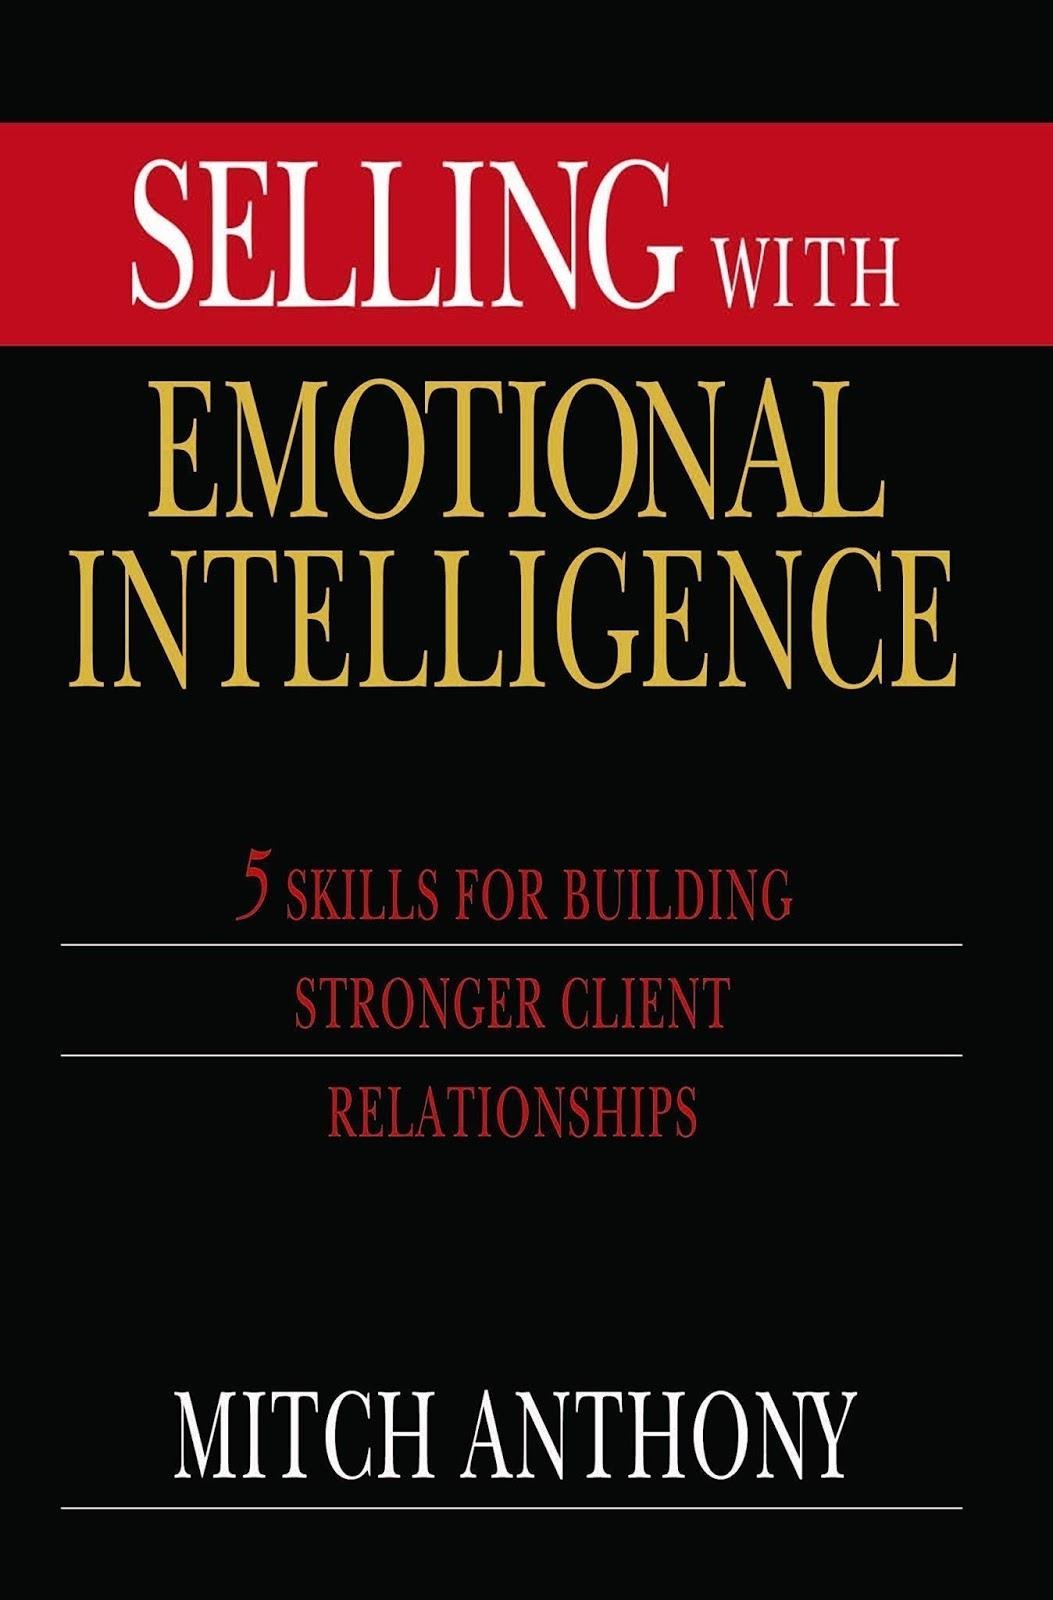 Buch „Selling with Emotional Intelligence“.